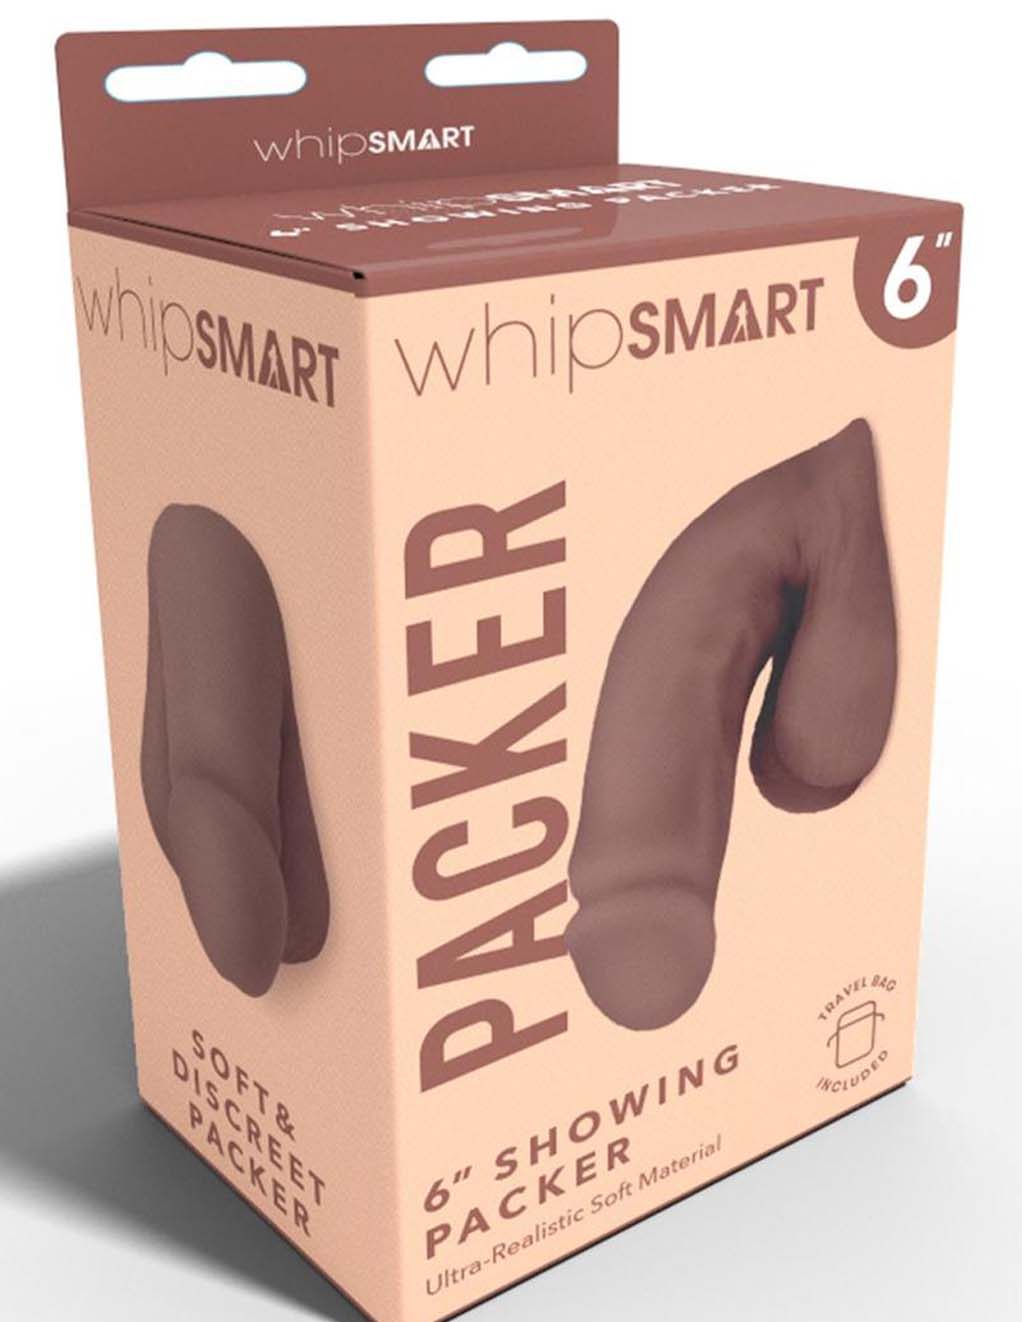 WhipSmart 6" Showing Packer- Chocolate- Box